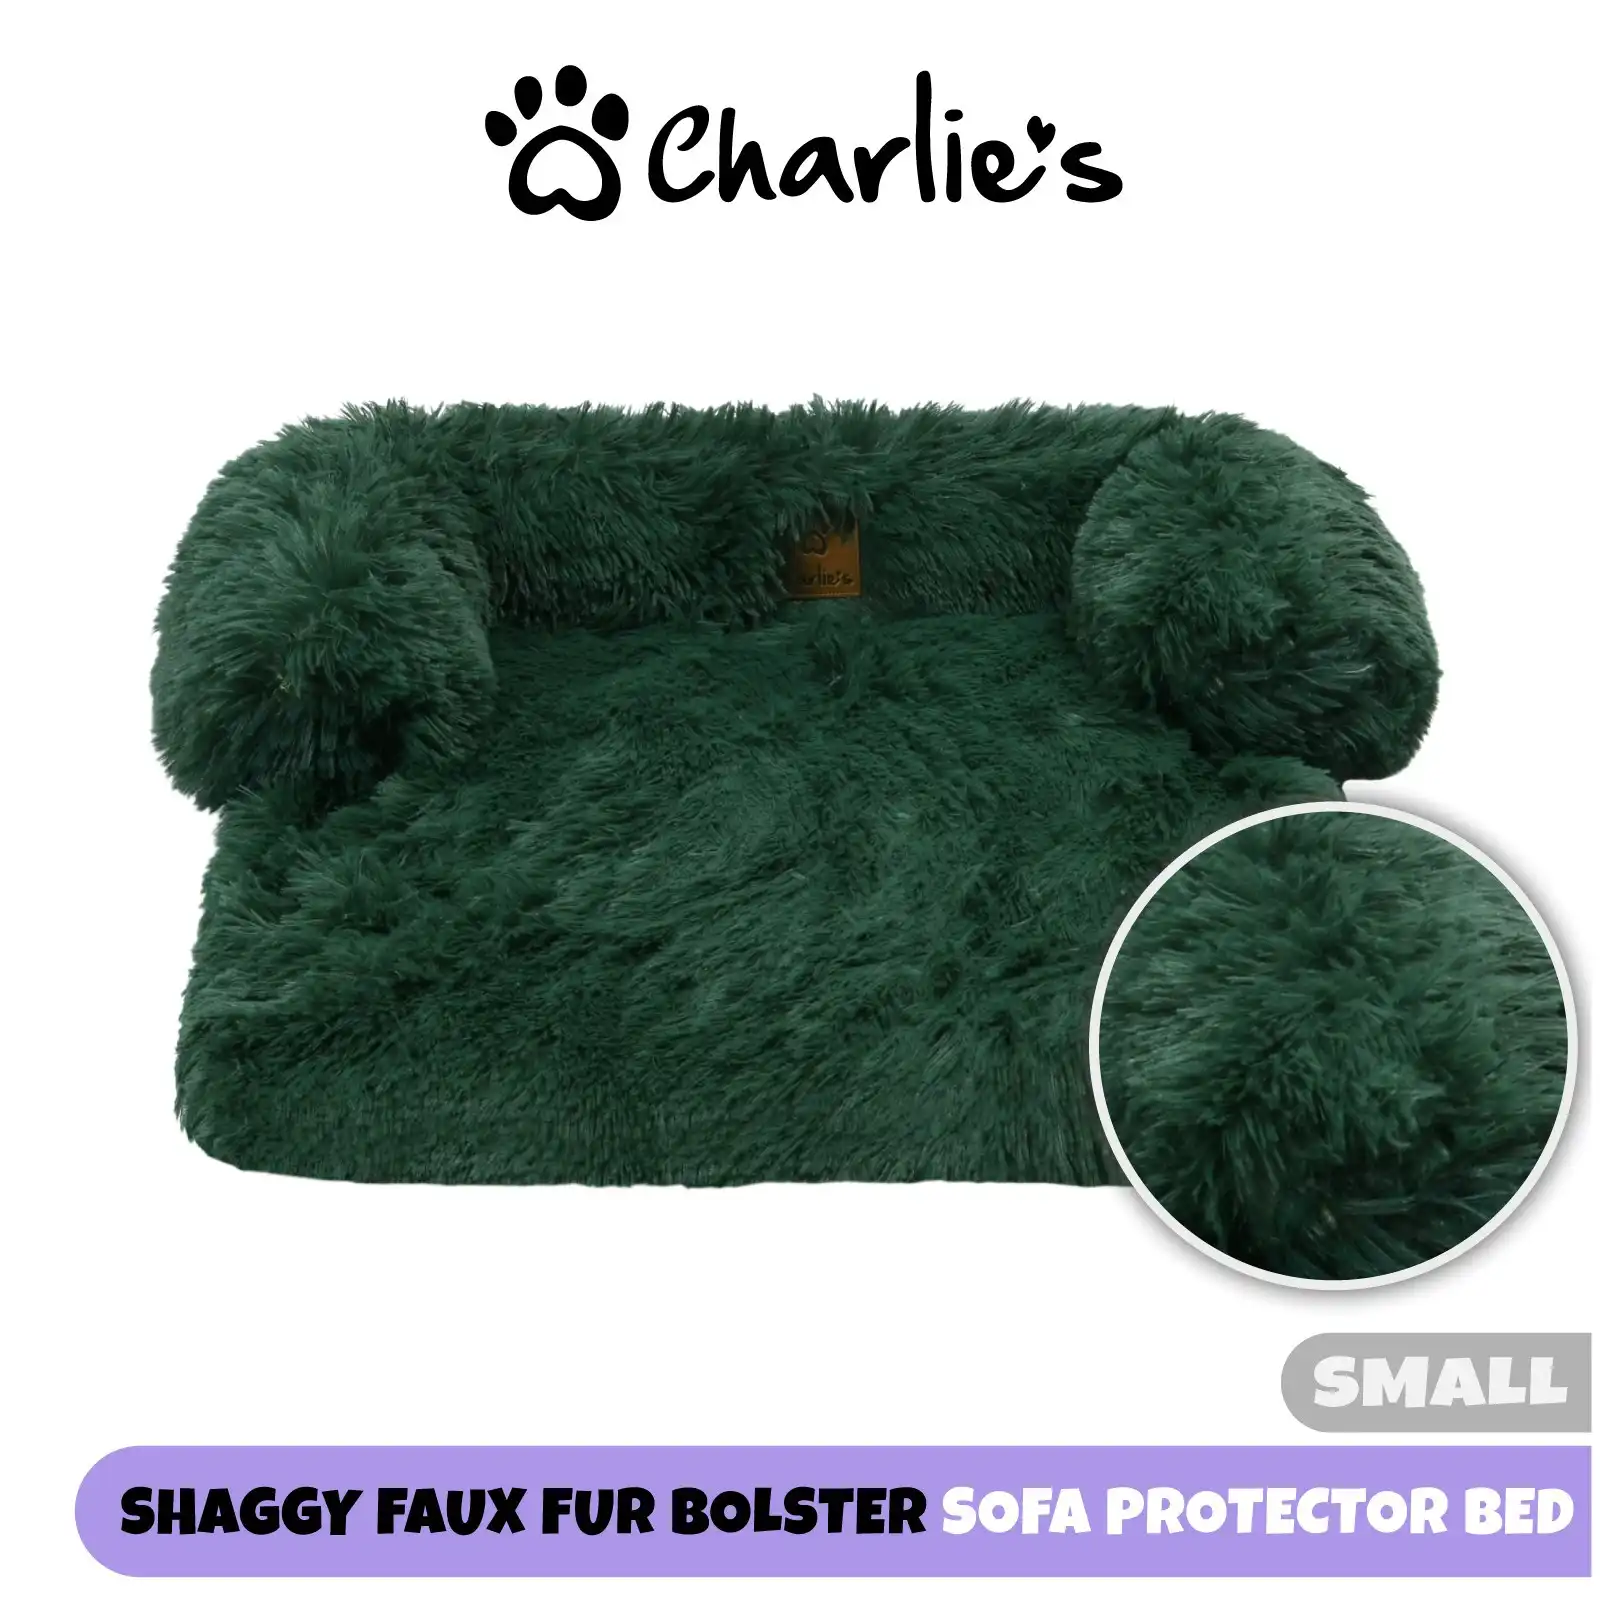 Charlie's Shaggy Faux Fur Bolster Sofa Protector Calming Dog Bed Eden Green Small